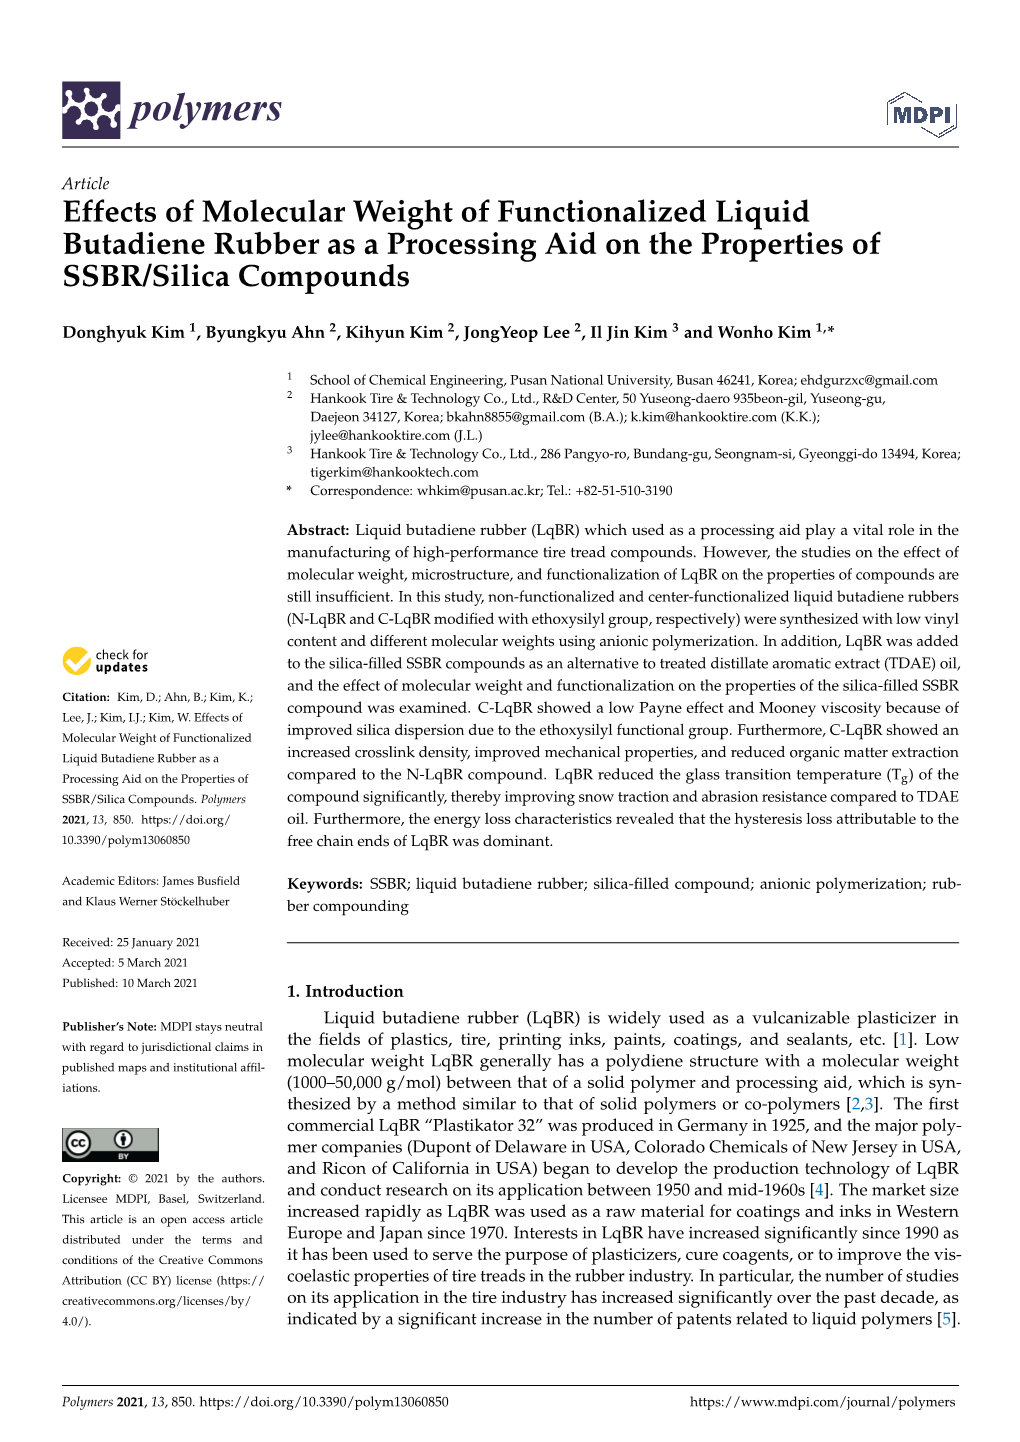 Effects of Molecular Weight of Functionalized Liquid Butadiene Rubber As a Processing Aid on the Properties of SSBR/Silica Compounds